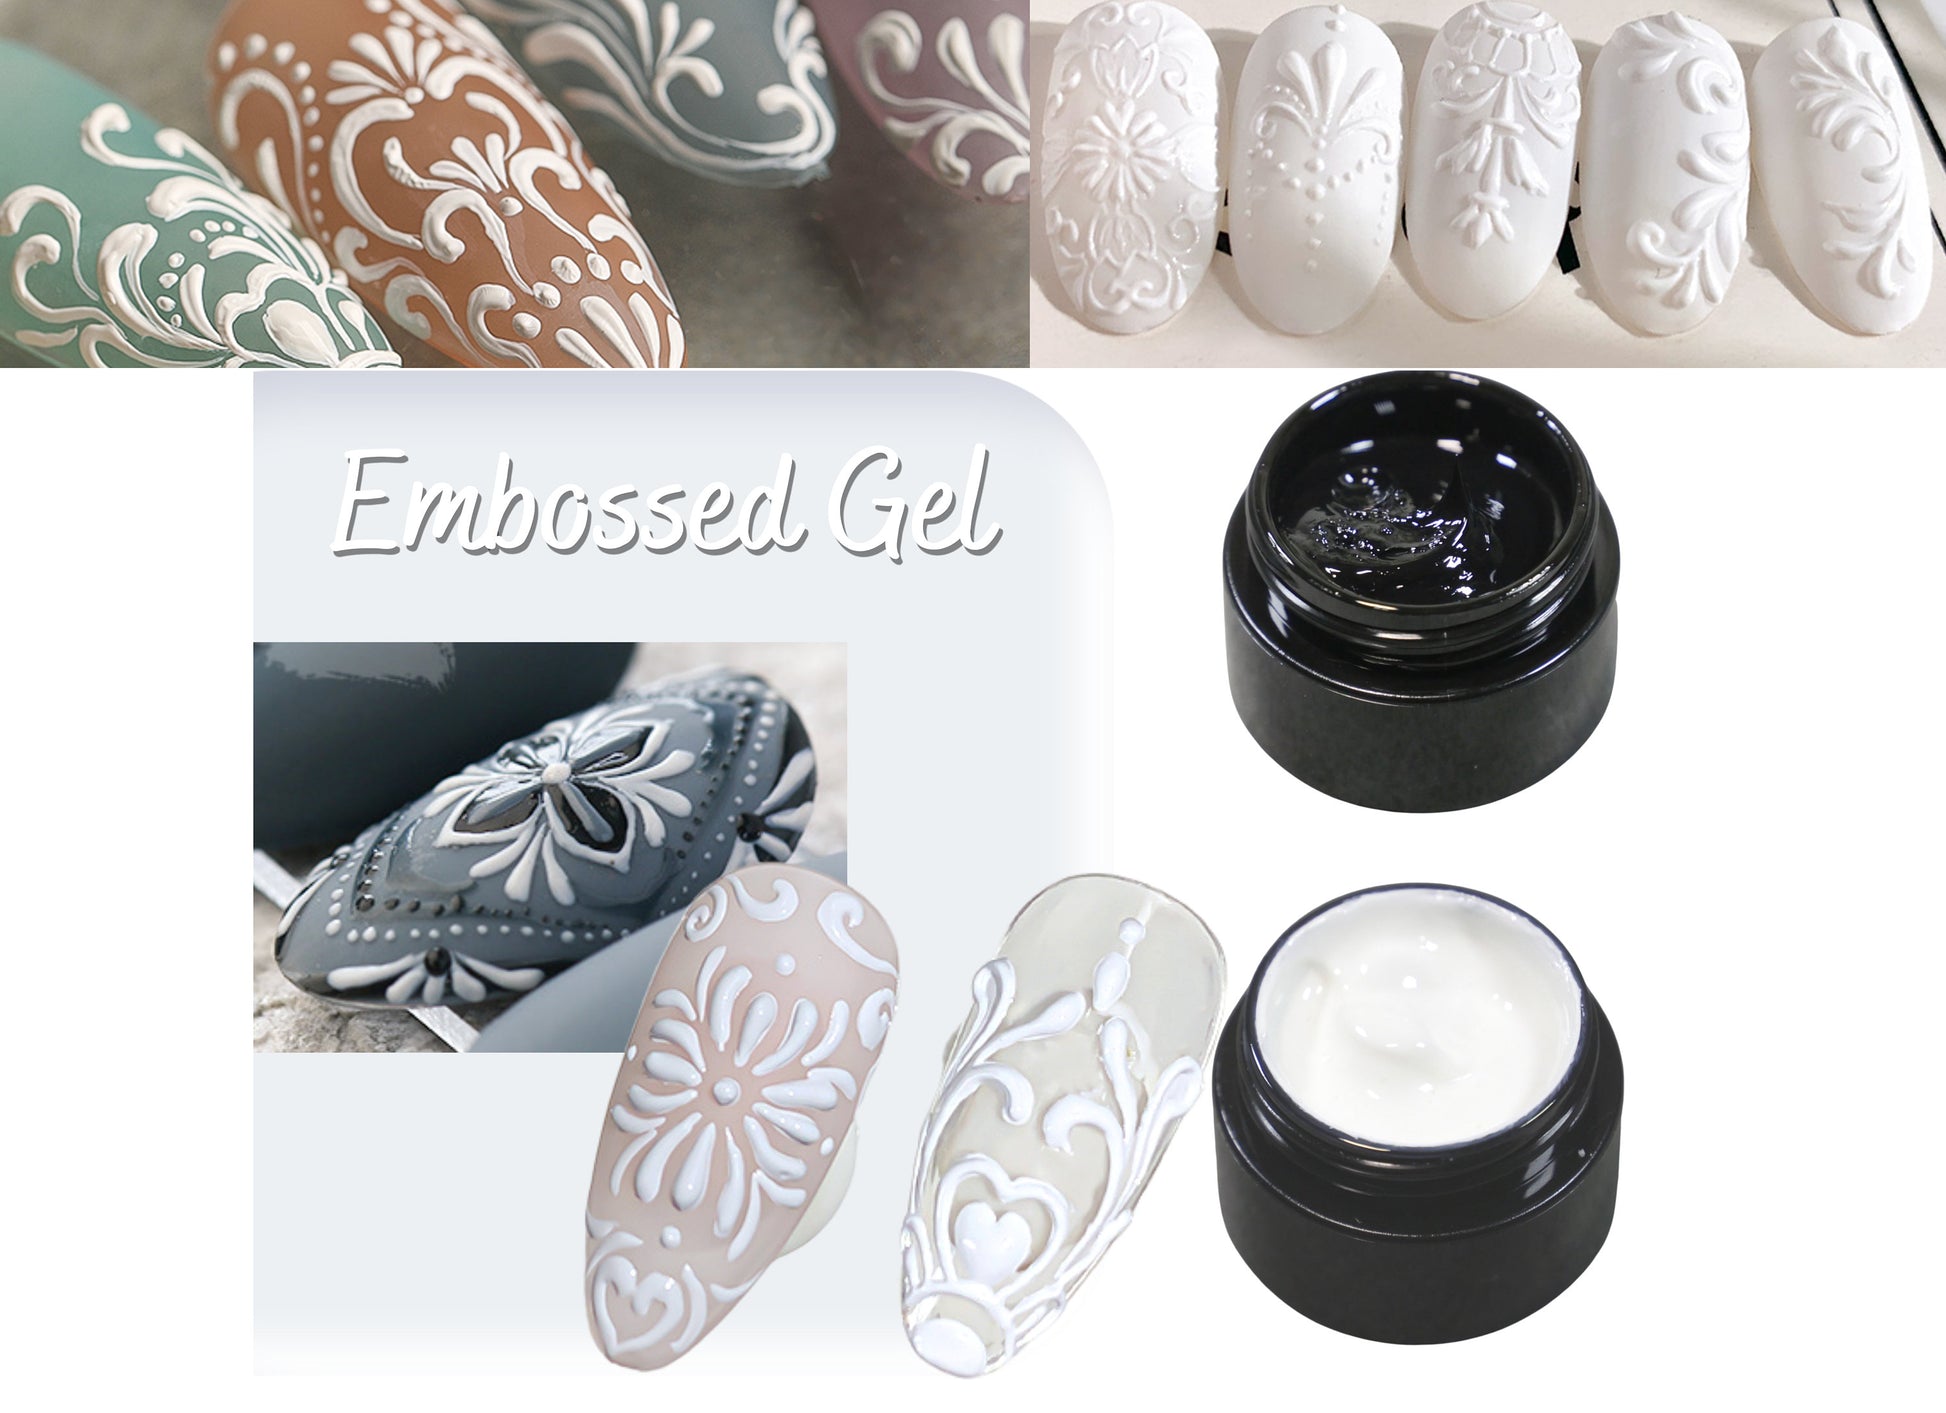 5g 3D Embossed UV Gel White & Black Graving UV/Led Gel in Container Embossing Nail Art Hand Painting Baroque Rococo Carve Patterns Supply